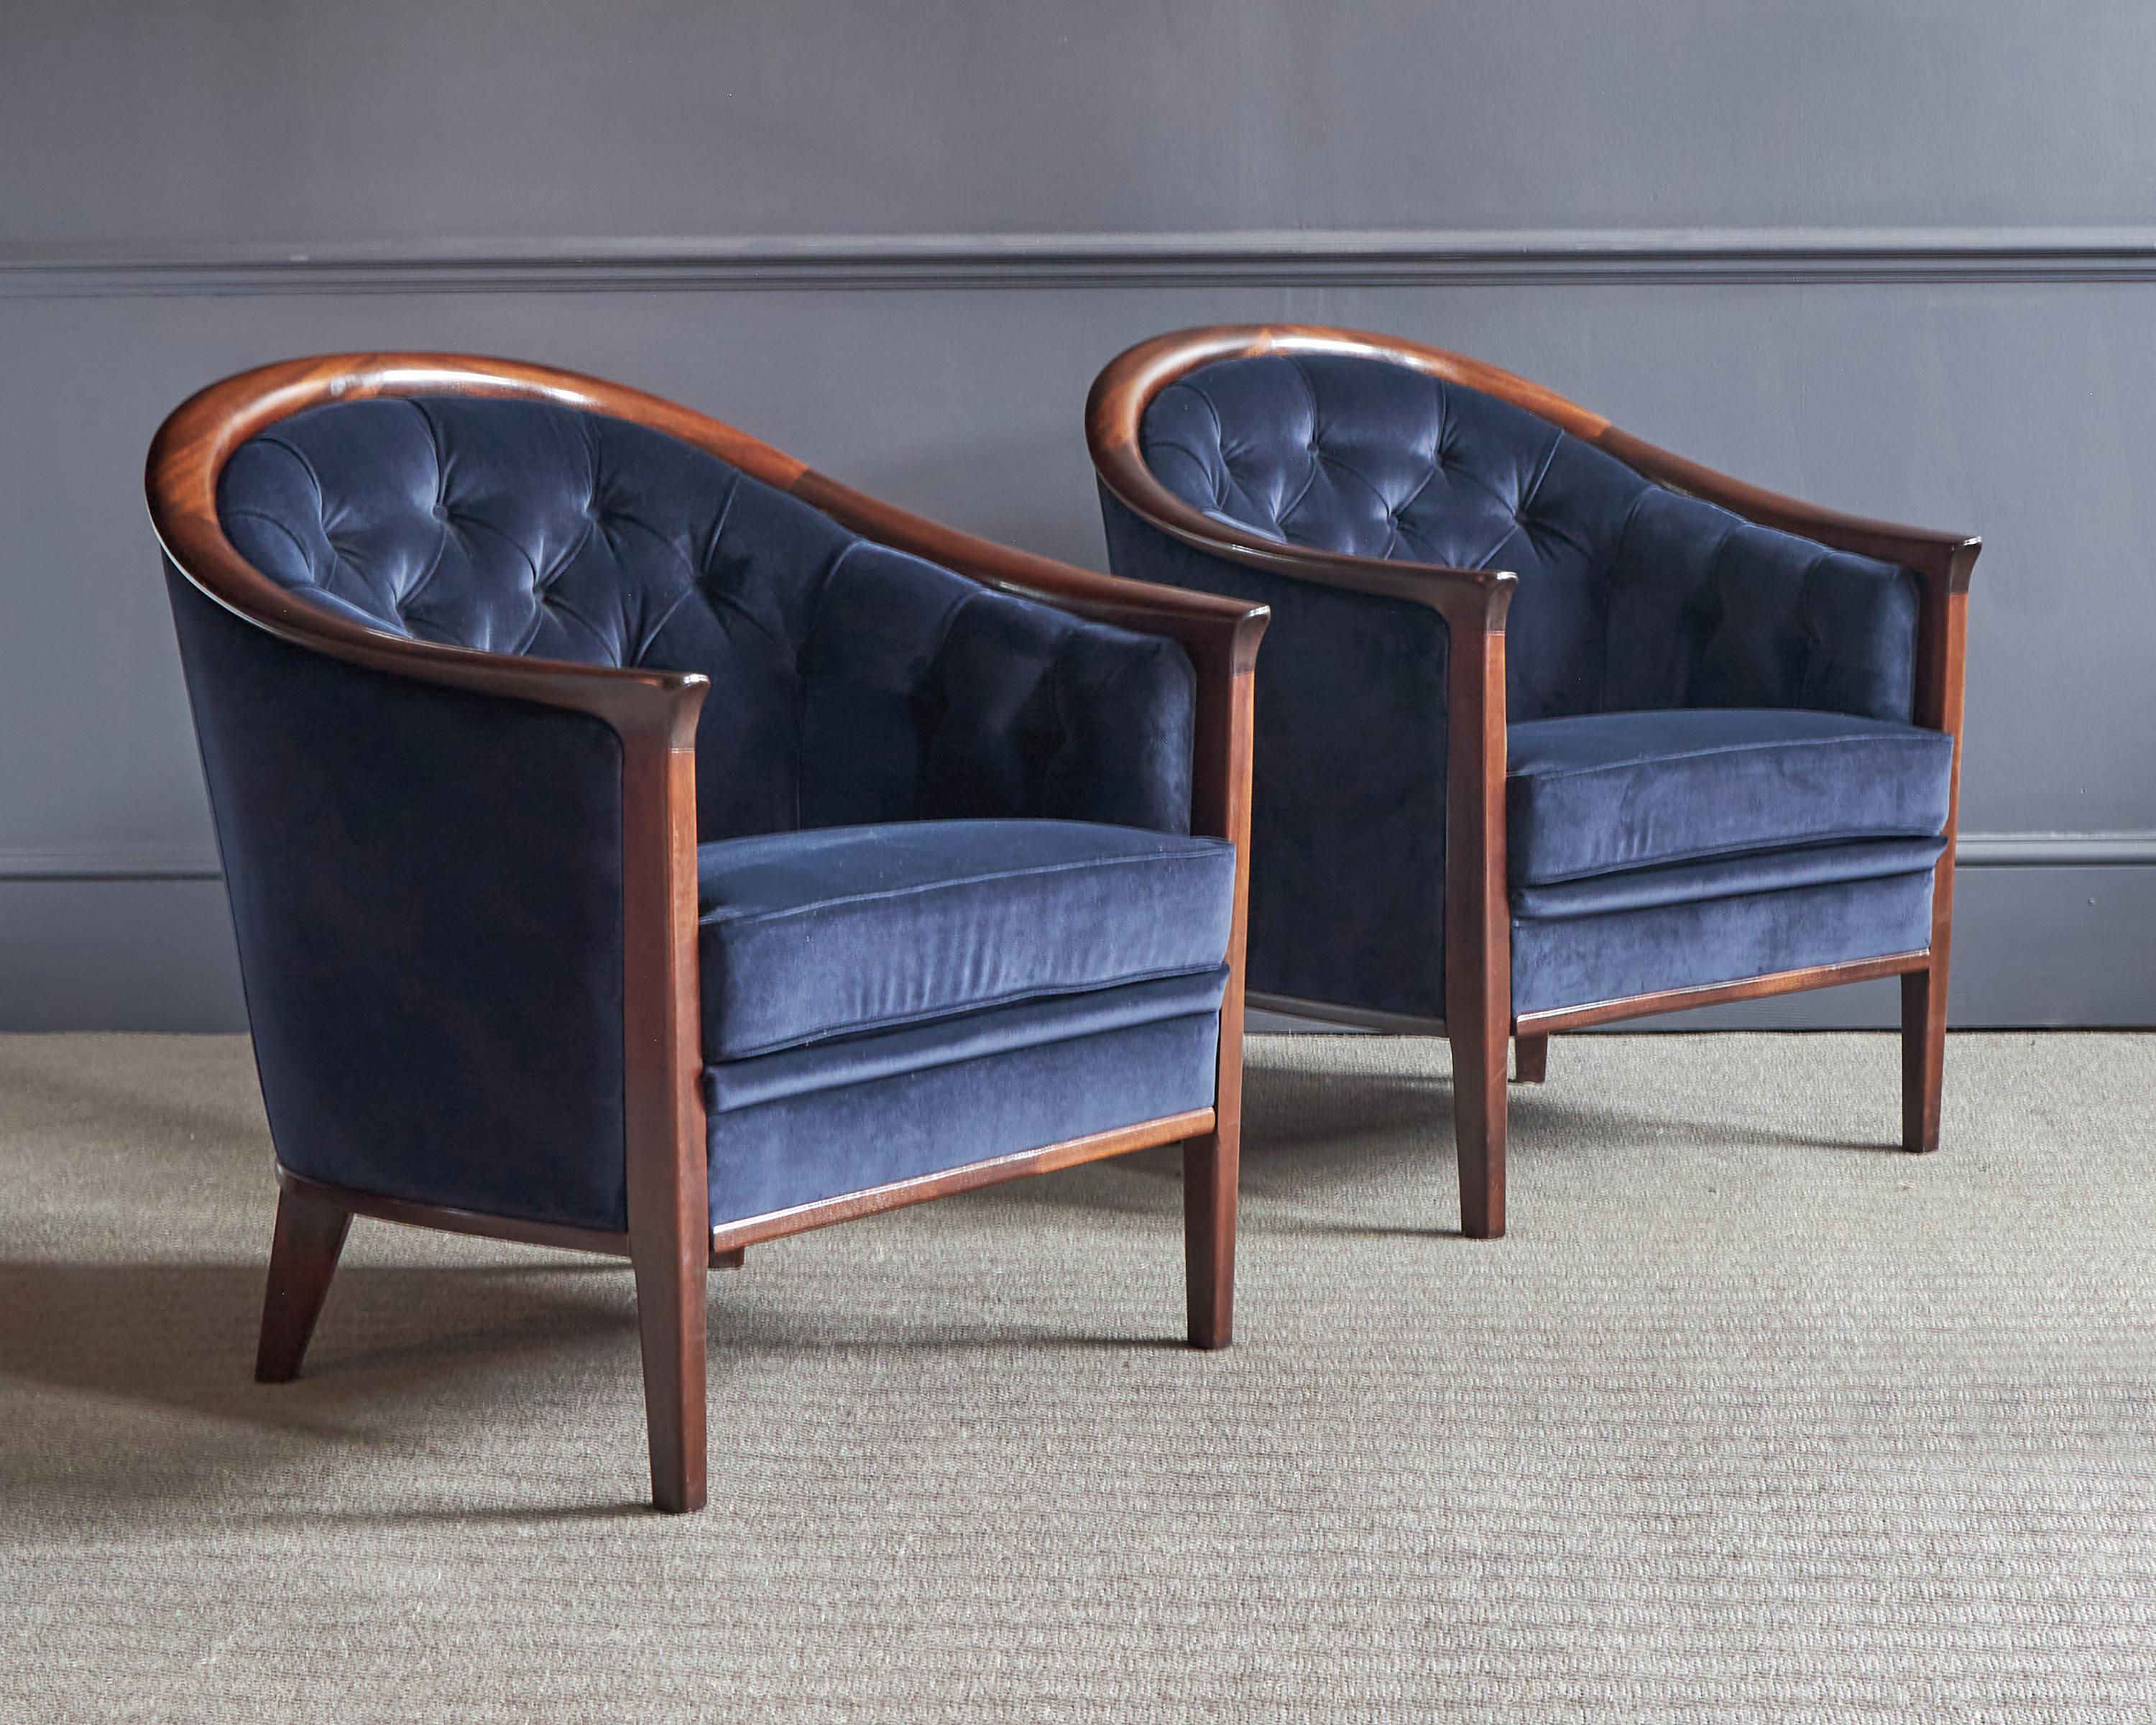 An absolutely stunning pair of vintage Swedish armchairs in Walnut. They were designed by Bertil Fridhagen in the 1960’s.

The quality is outstanding, the solid walnut frames have beautiful, sweeping curves. They are well sprung and very